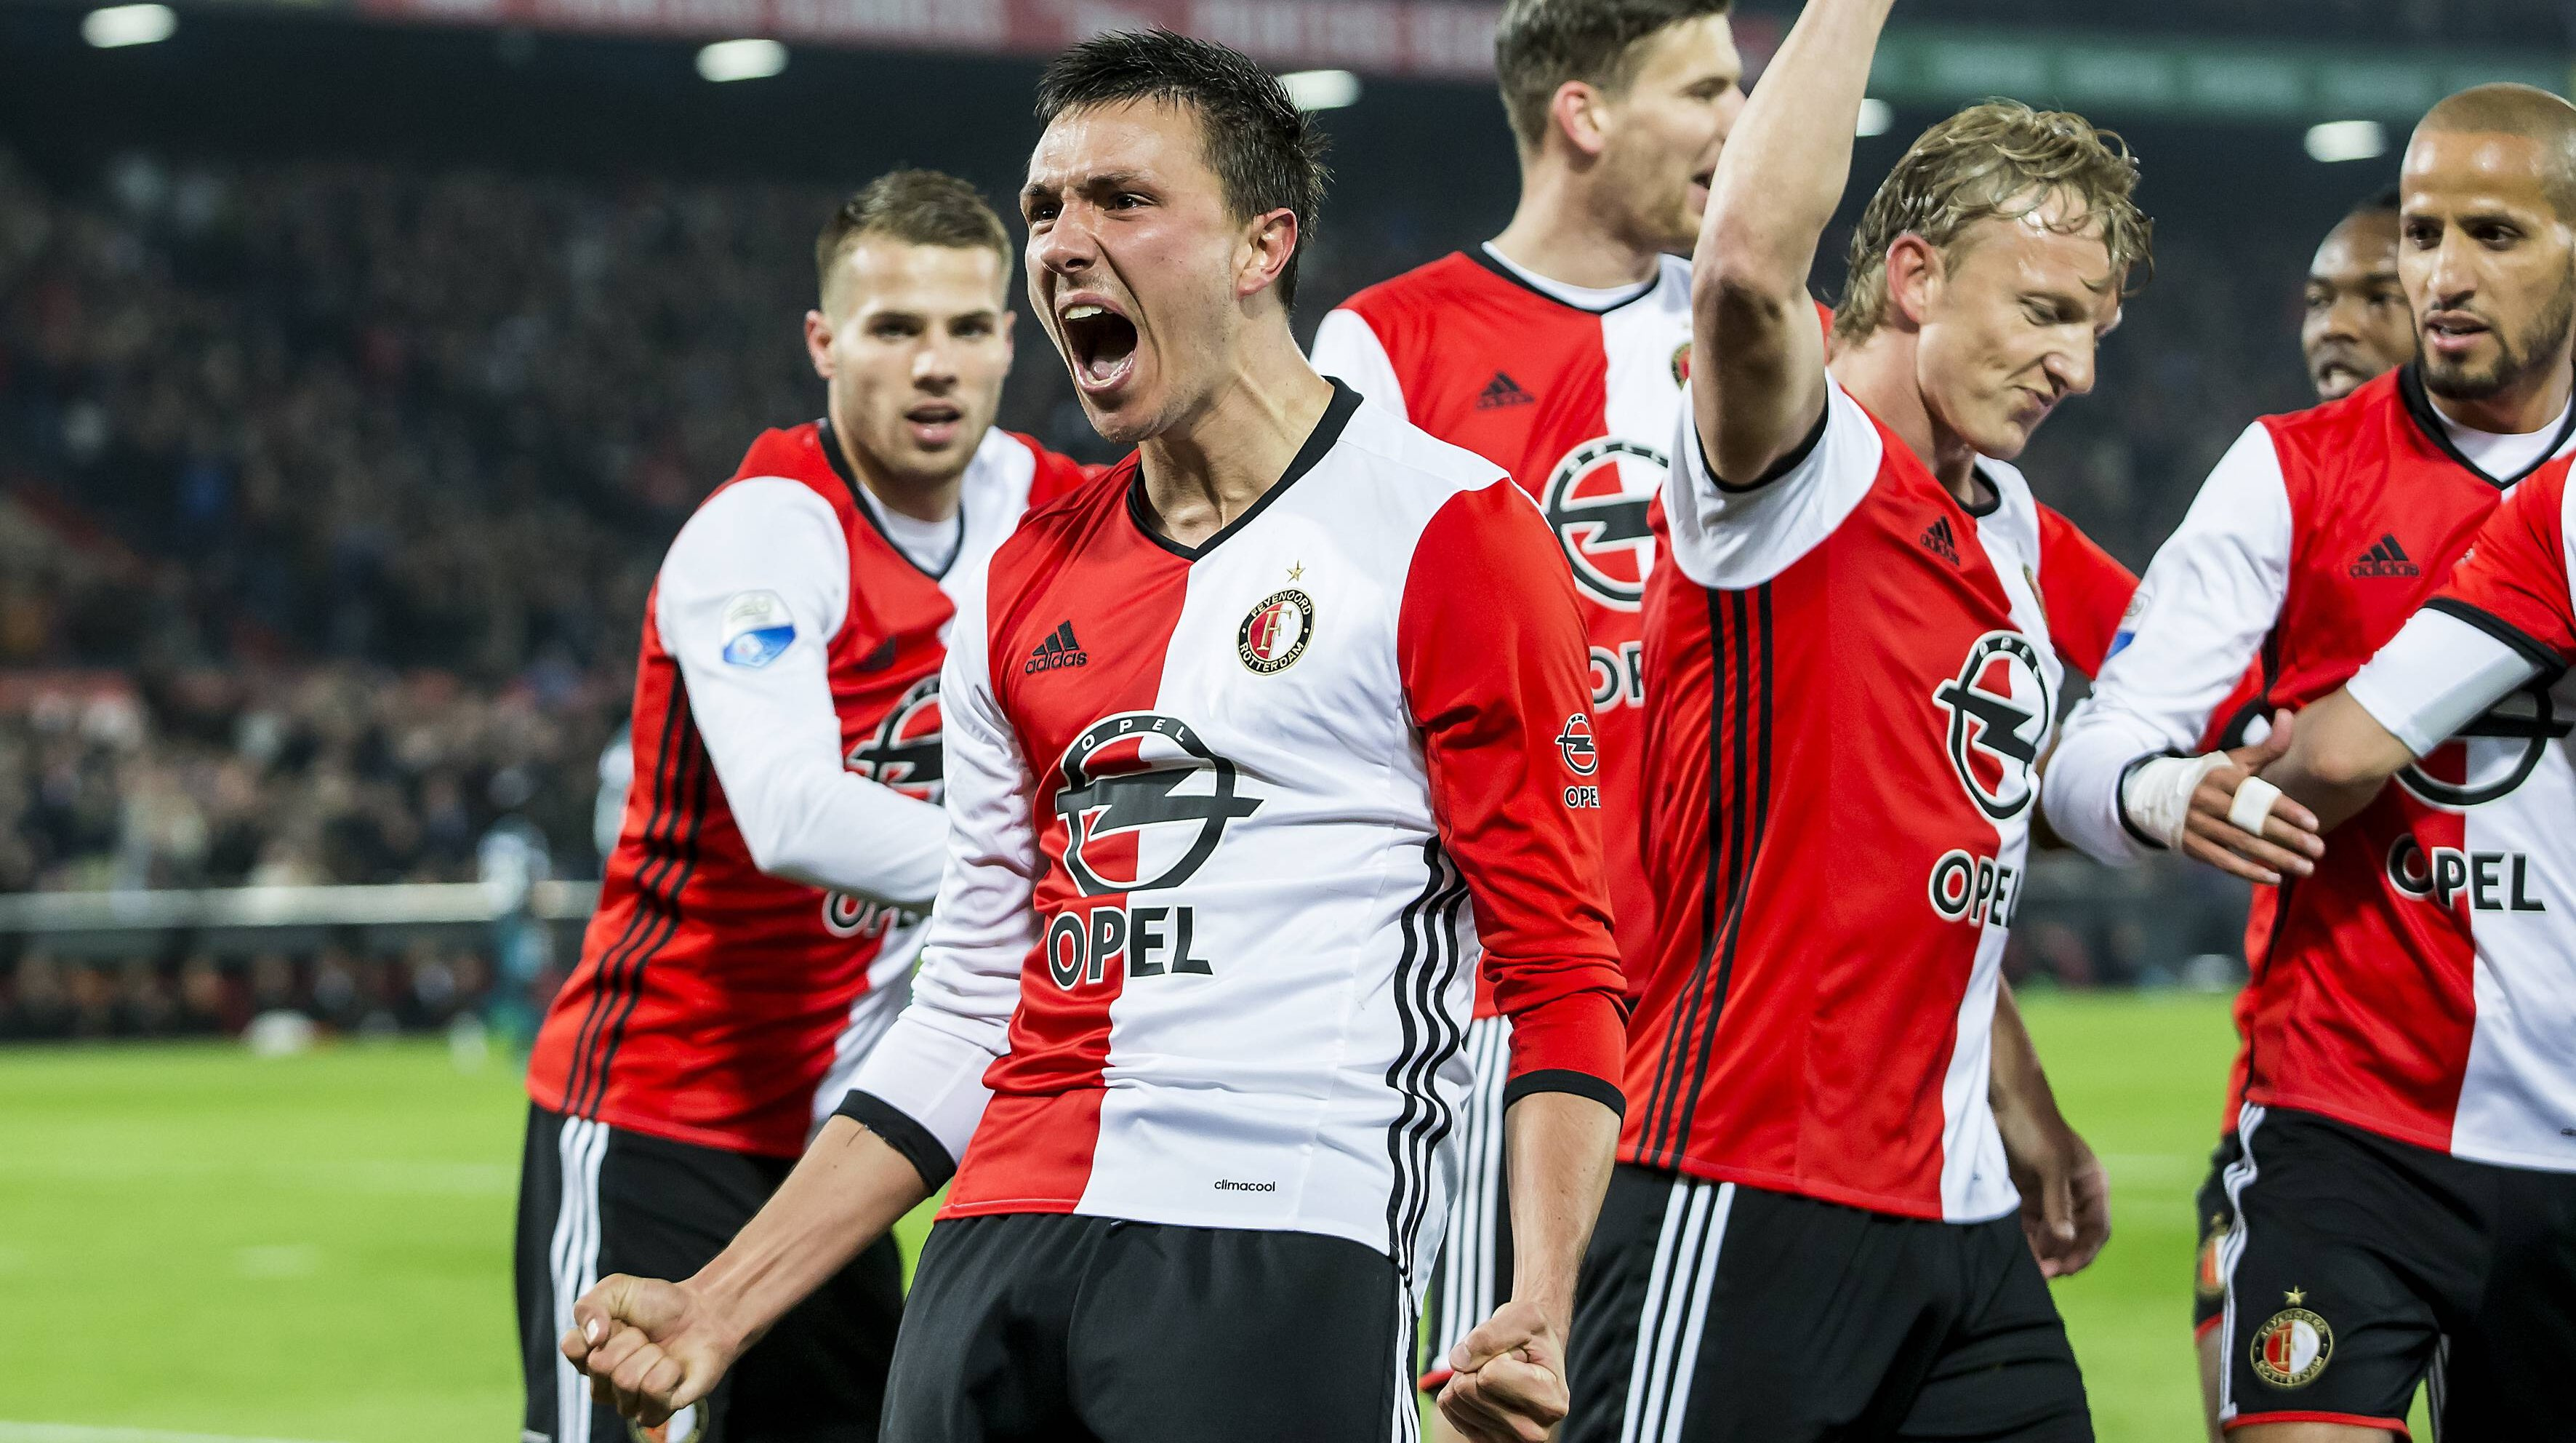 Feyenoord captain Berghuis on Roma interest: “Going on for quite a while now” | Transfermarkt